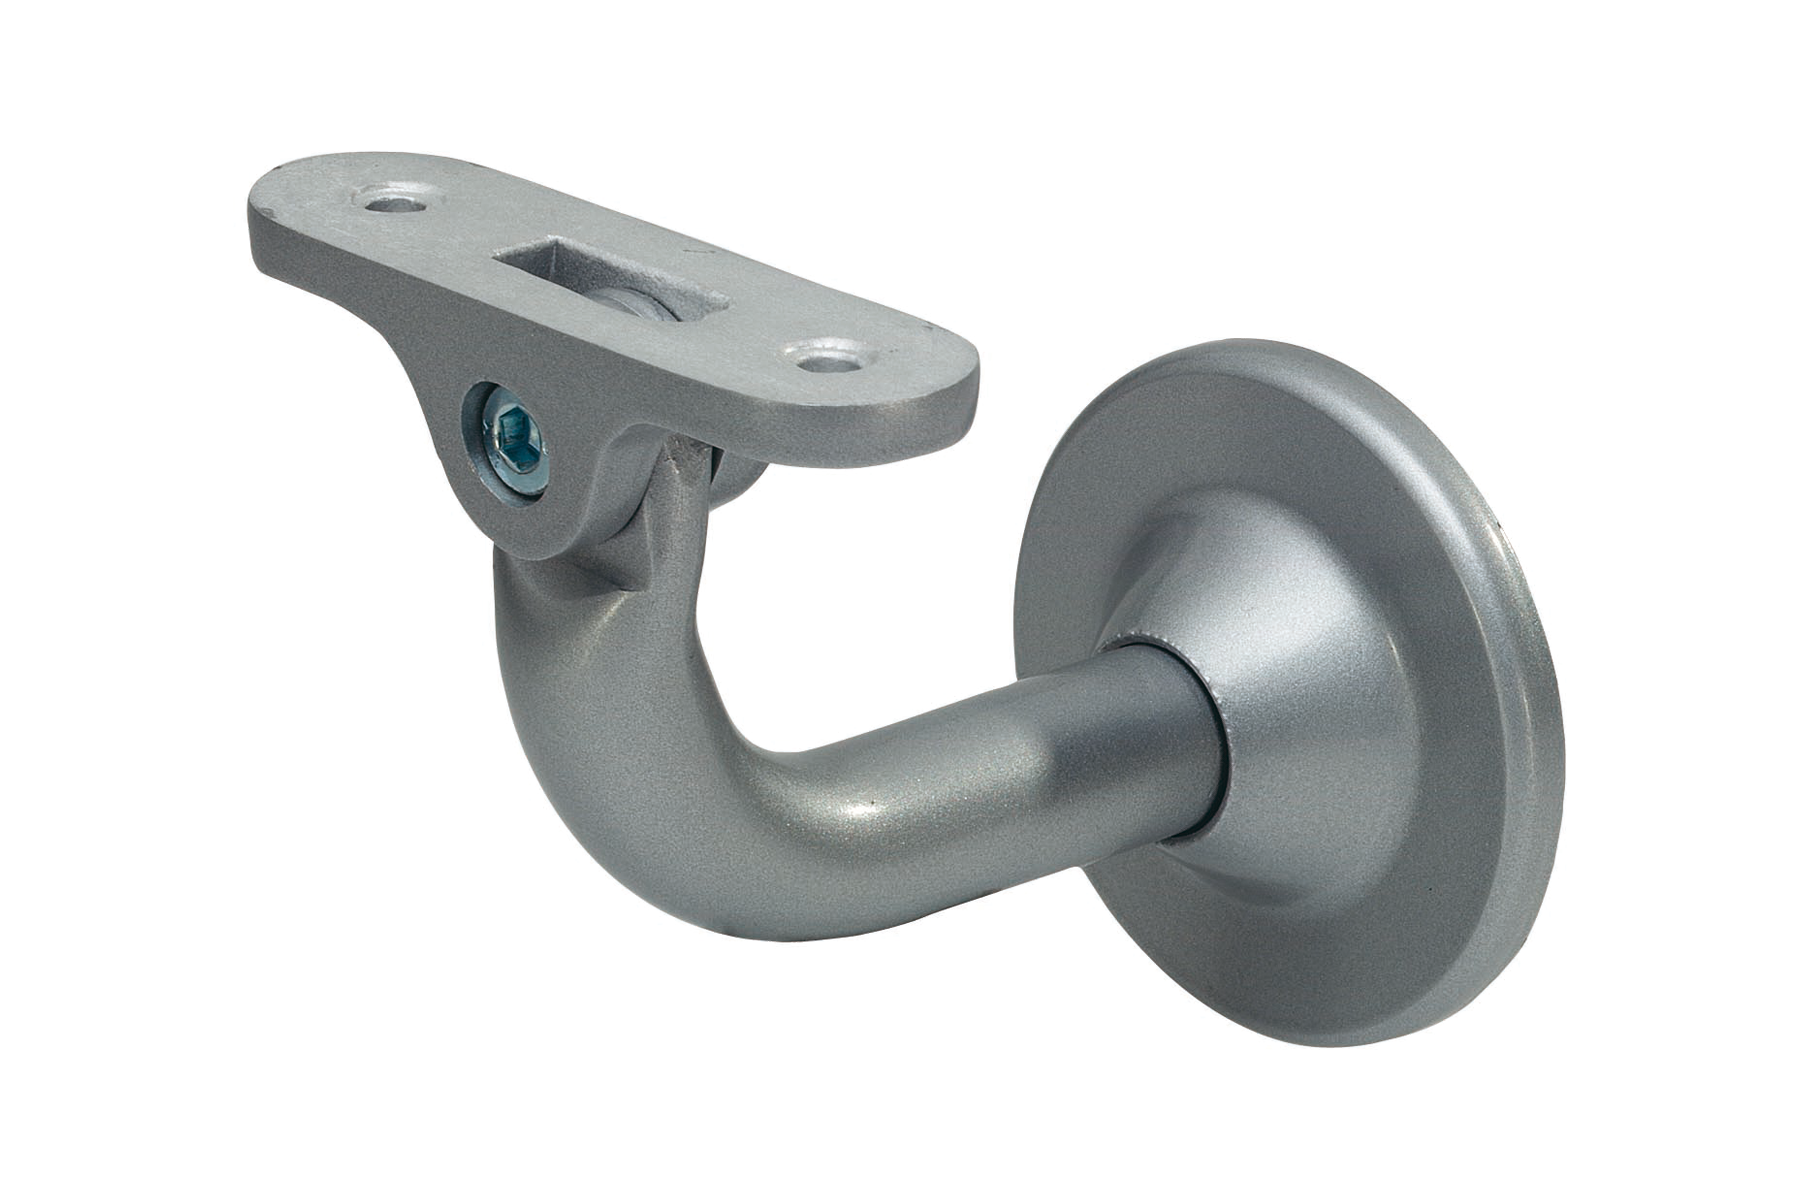 KWS Handrail support 4513 in finish 02 (steel, silver stove-enamelled)